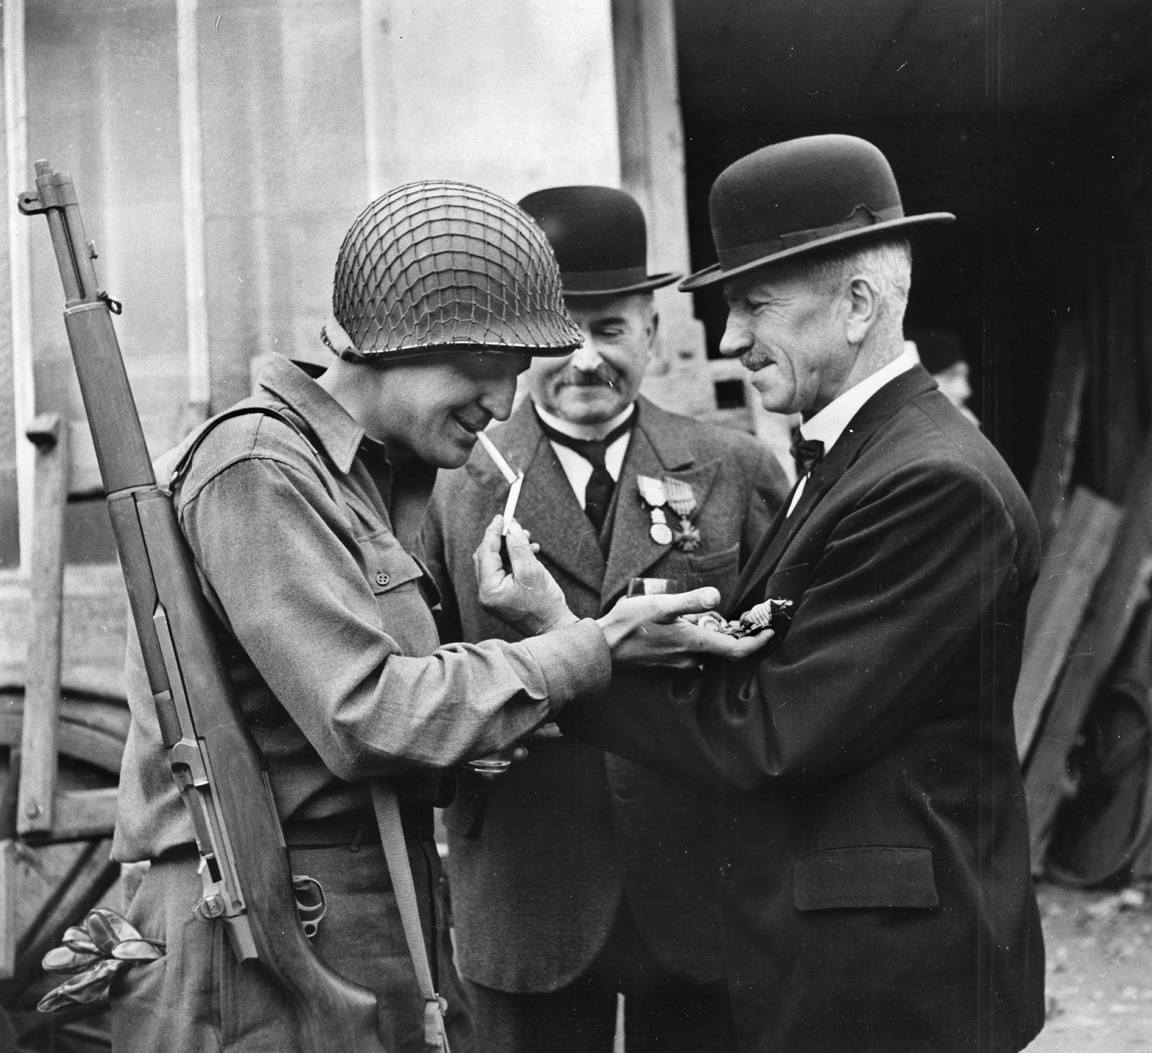 A GI examines a Frenchman’s World War I medals while the Frenchman offers a chain to the American’s cigarette.